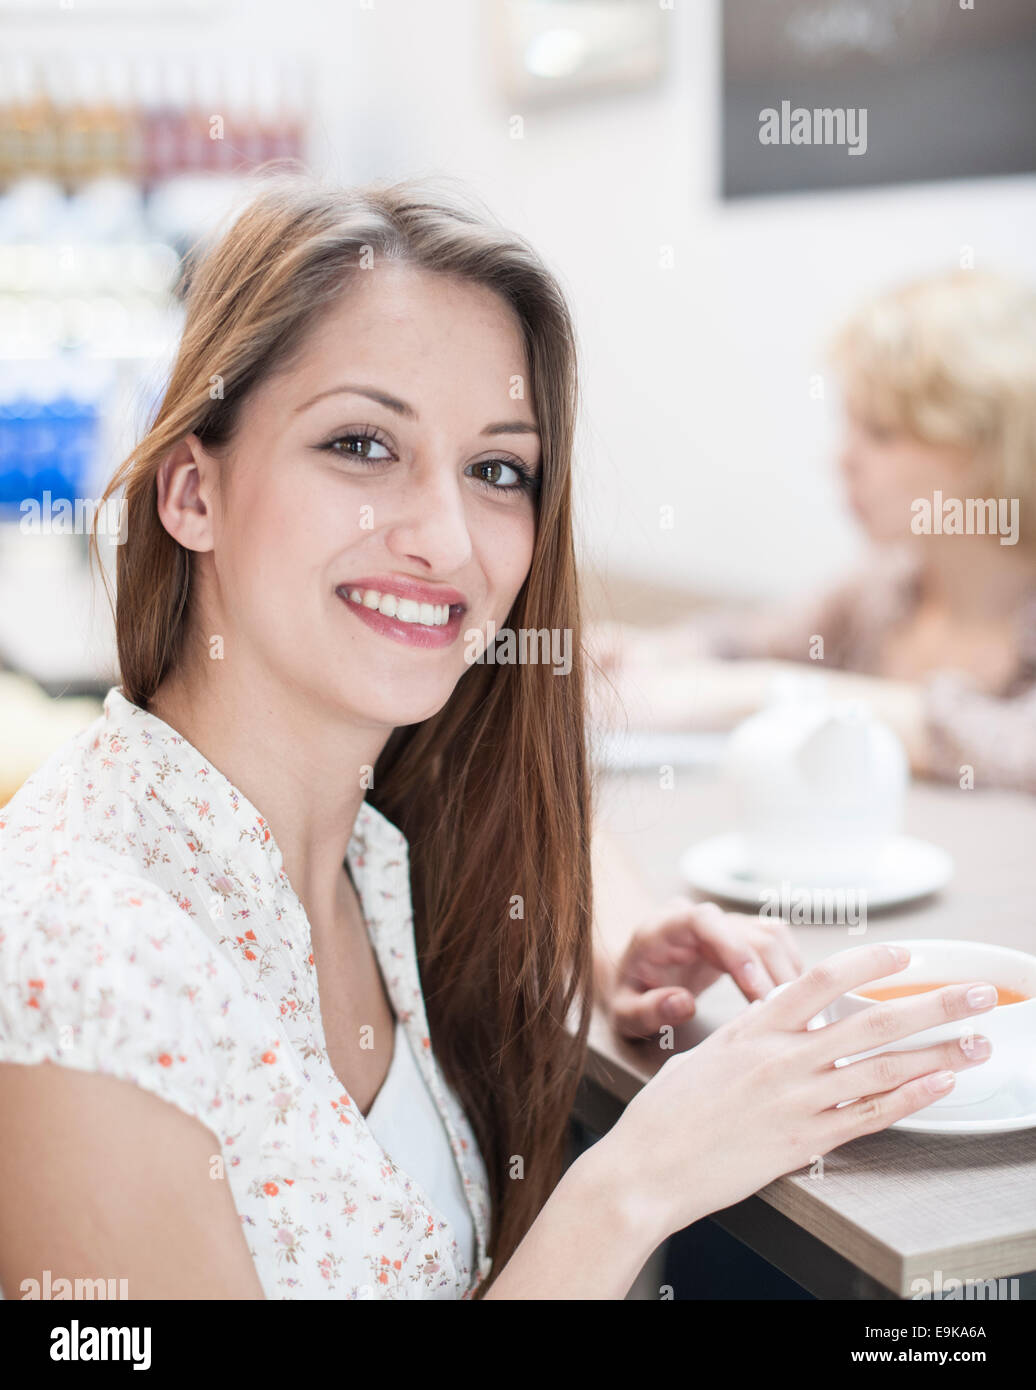 Portrait of beautiful young woman having coffee at table in cafe Stock Photo